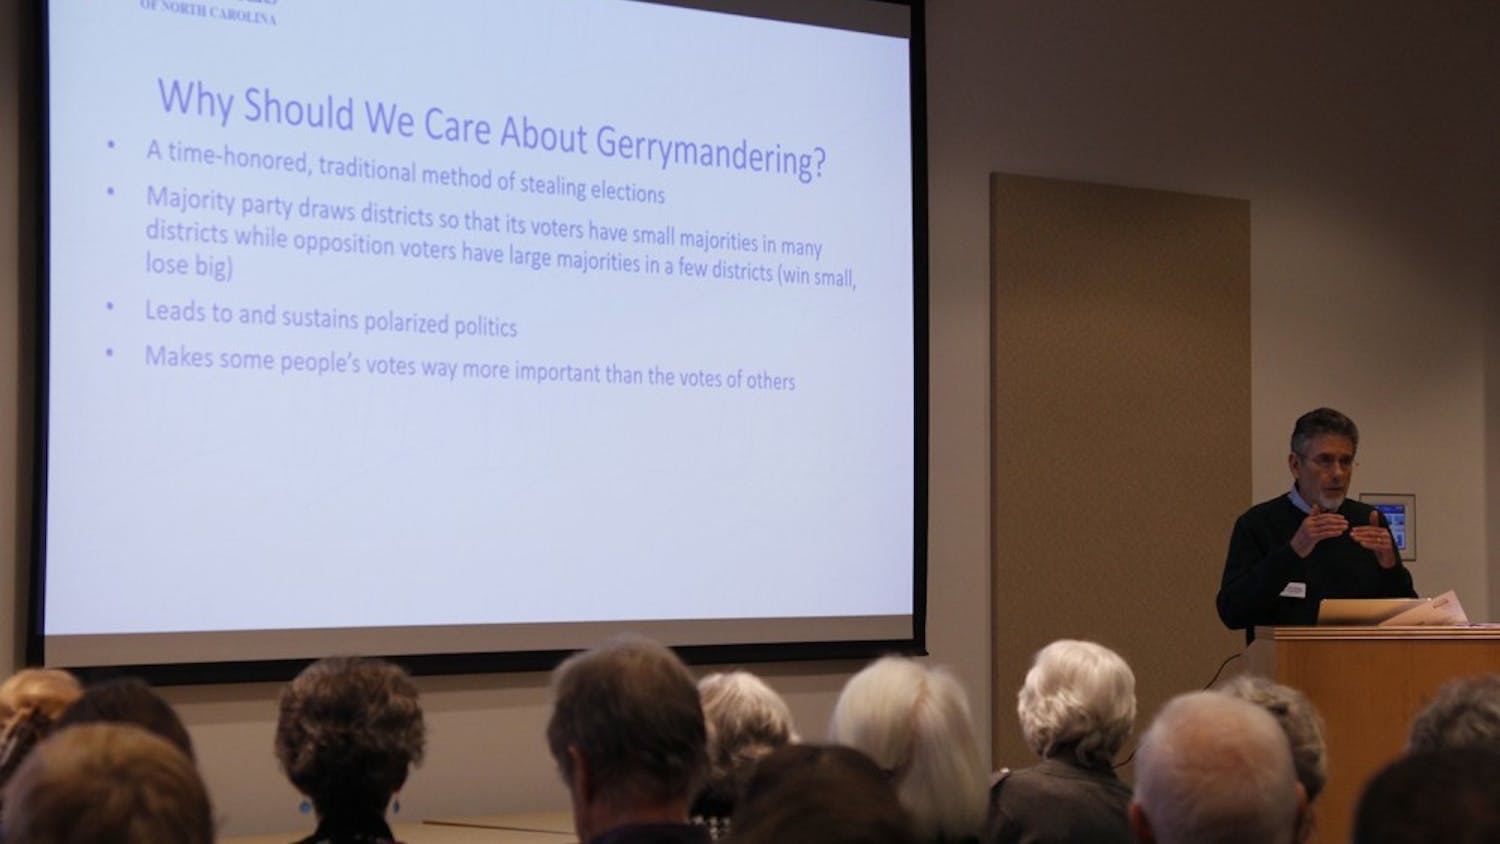 Walter Salinger, a retired professor of psychology from the University of North Carolina at Greensboro, currently serves on the Boards of Directors of both the League of Women Voters of Piedmont Triad and the League of Women Voters of North Carolina. On the evening of February 2nd, he gave a talk at the Chapel Hill Public Library to explain the consequences of gerrymandering voting districts and advocate for a nonpartisan redistricting plan.